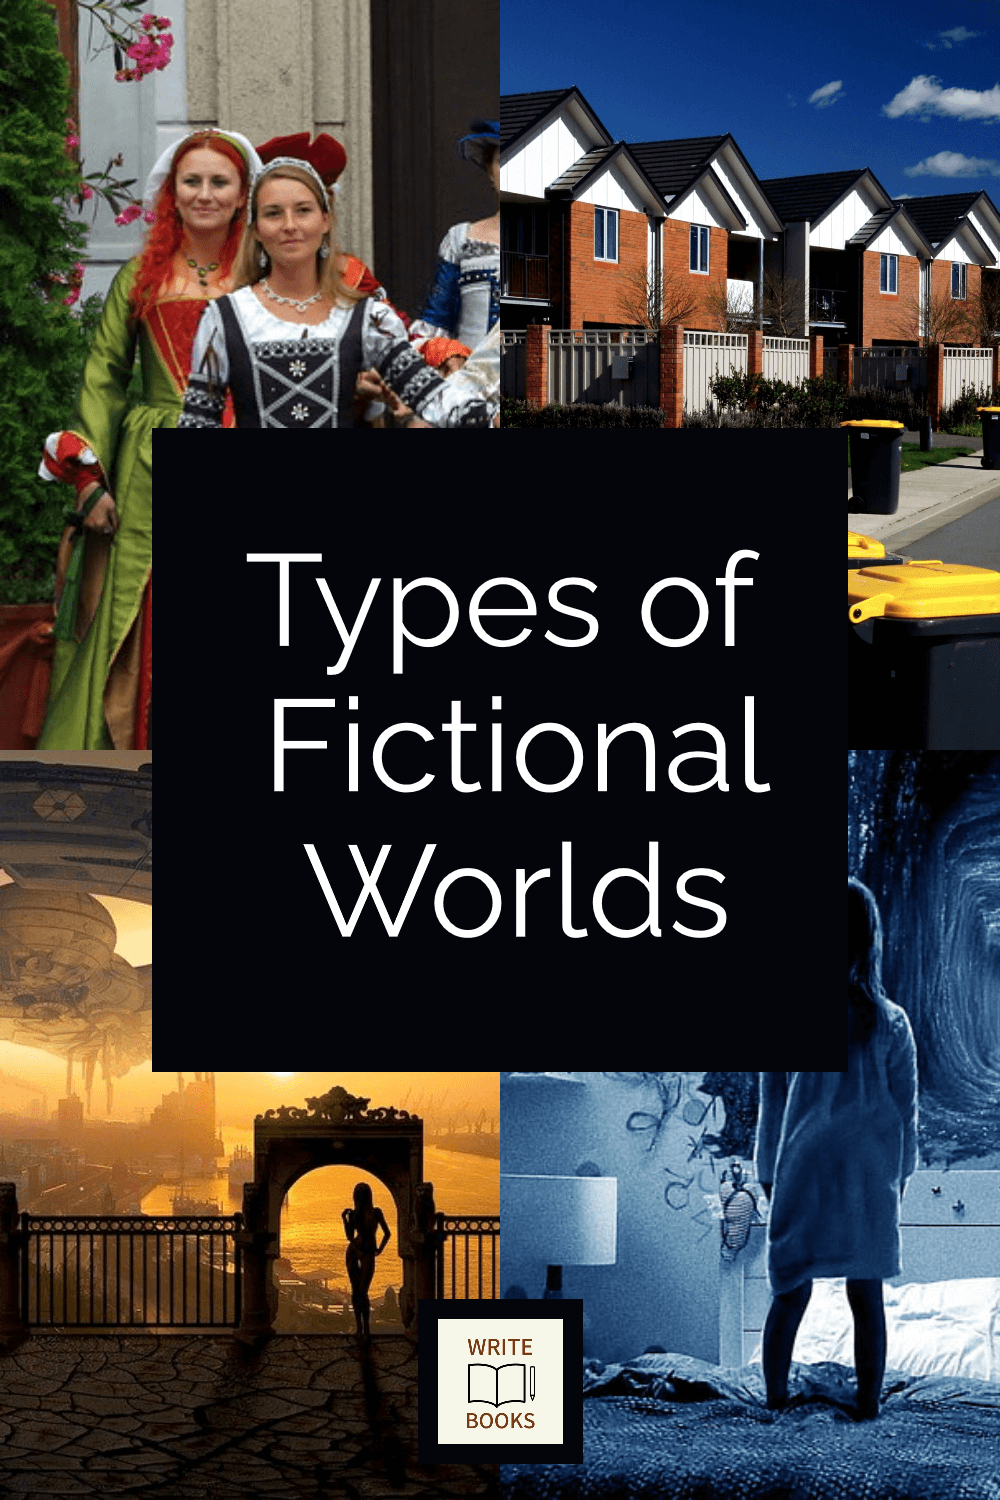 Writers use many types of fictional worlds as settings -- from present day reality to exotic fantasy worlds.